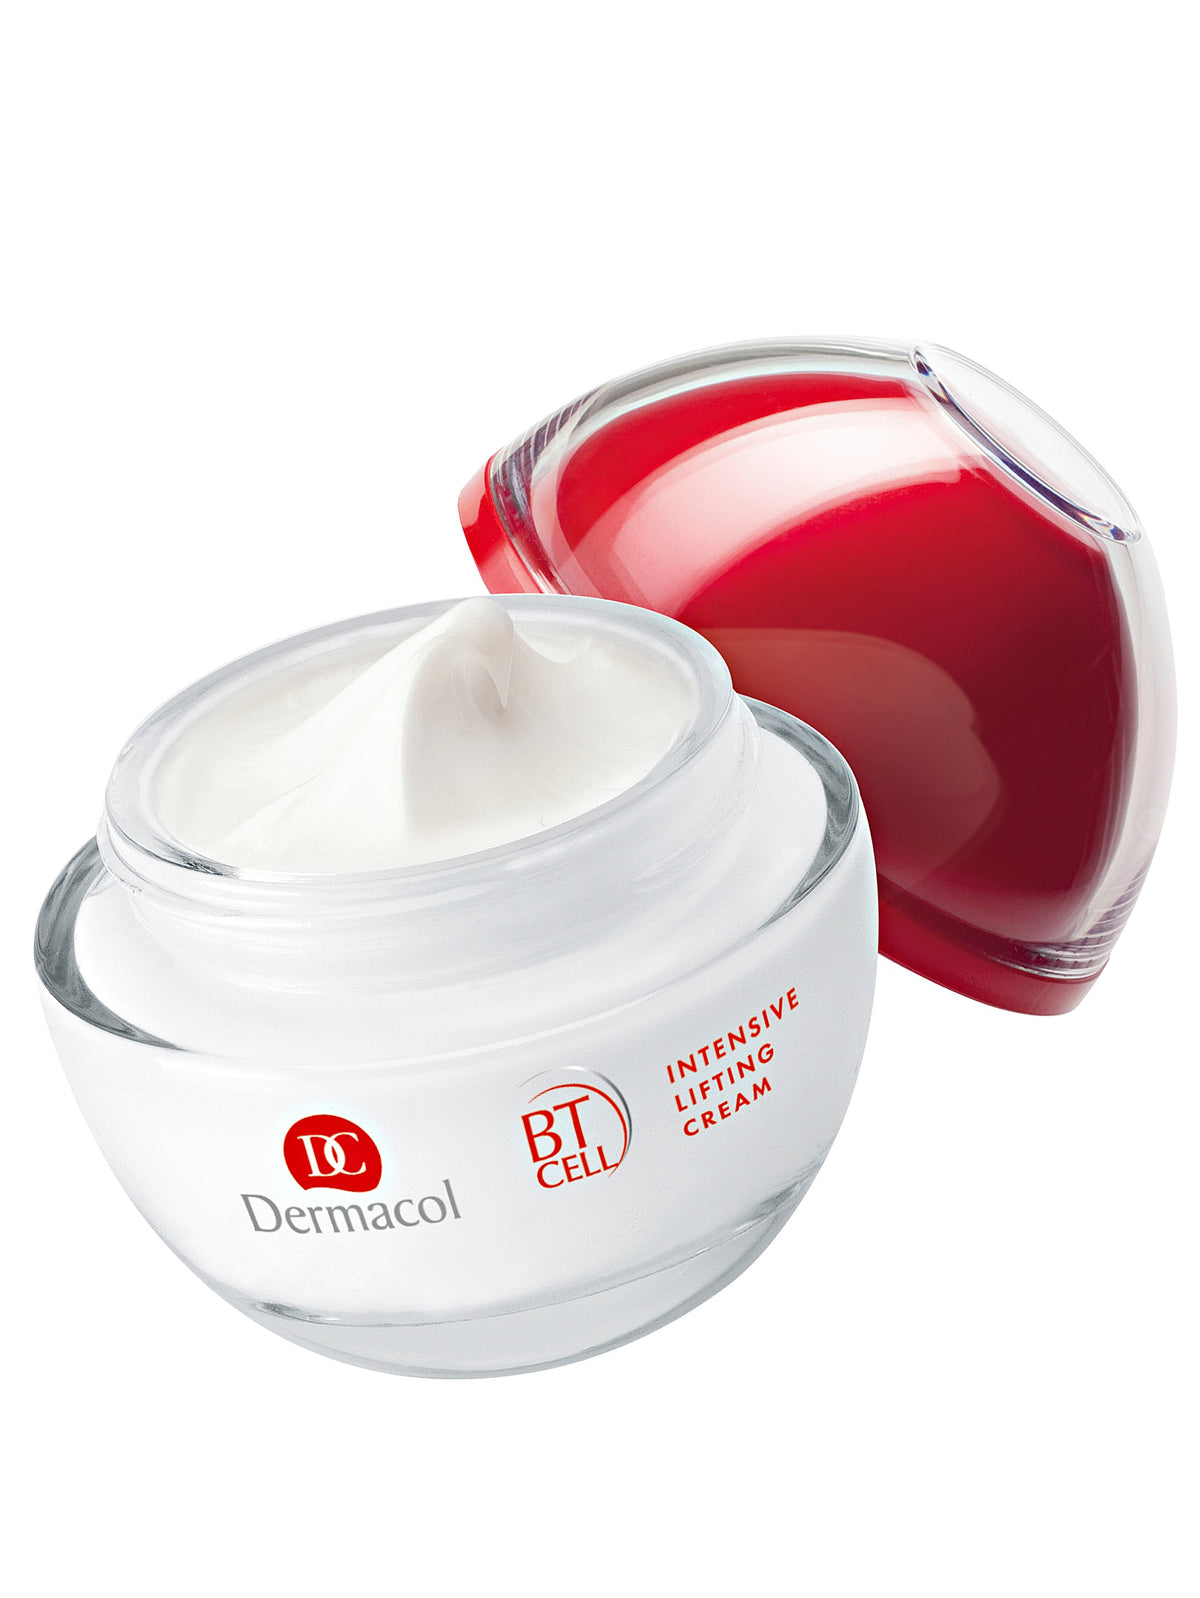 BT CELL Intensive Lifting Creme